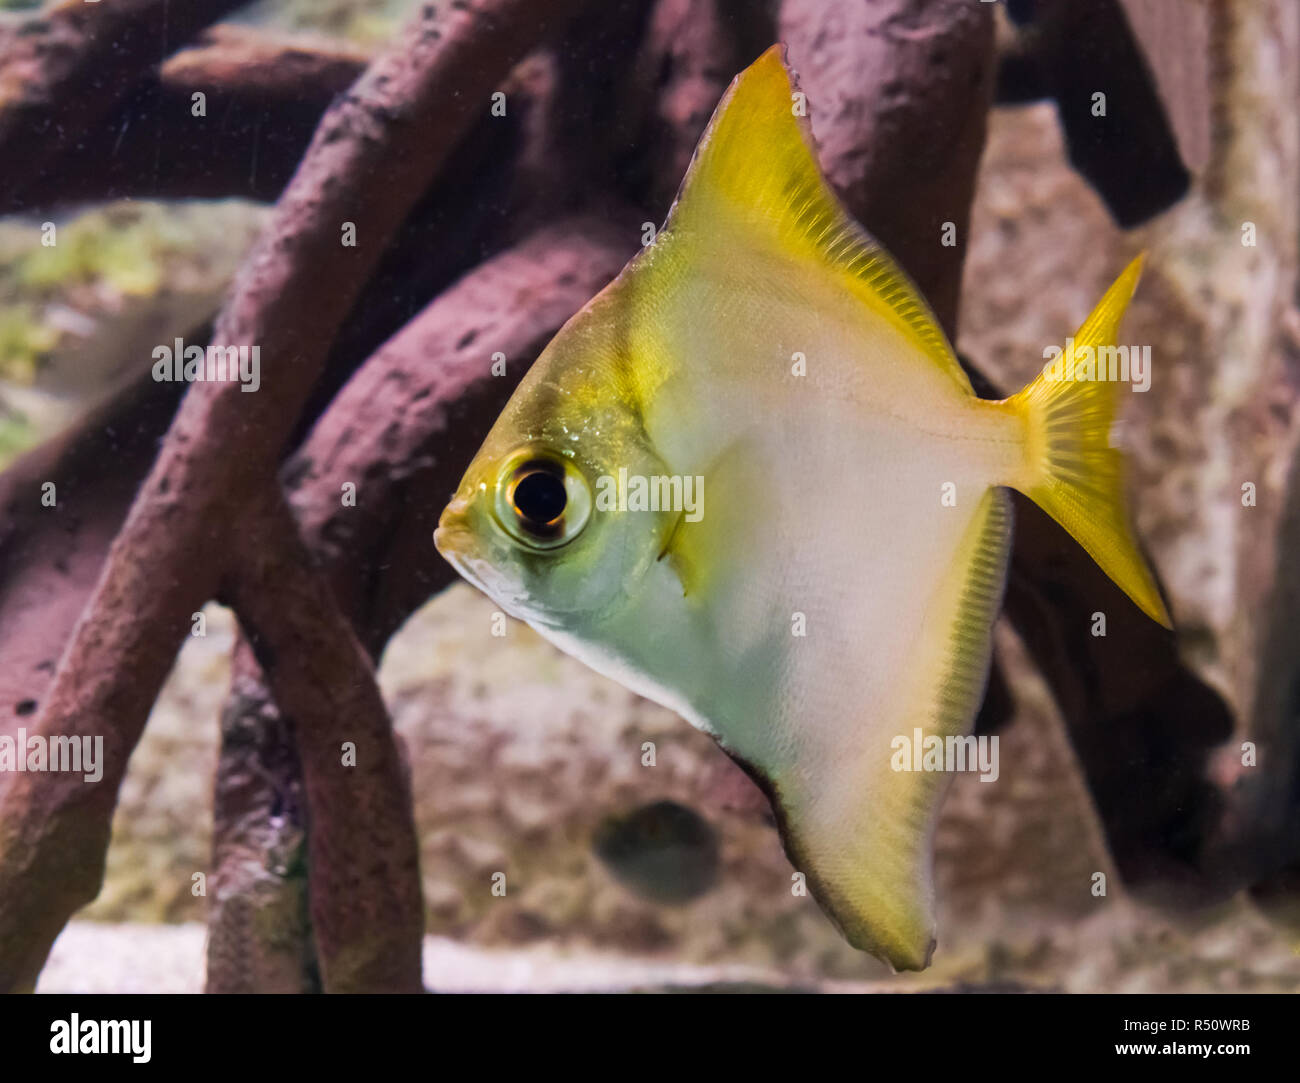 silver moonyfish in closeup, a tropical aquarium pet from the pacific ocean Stock Photo